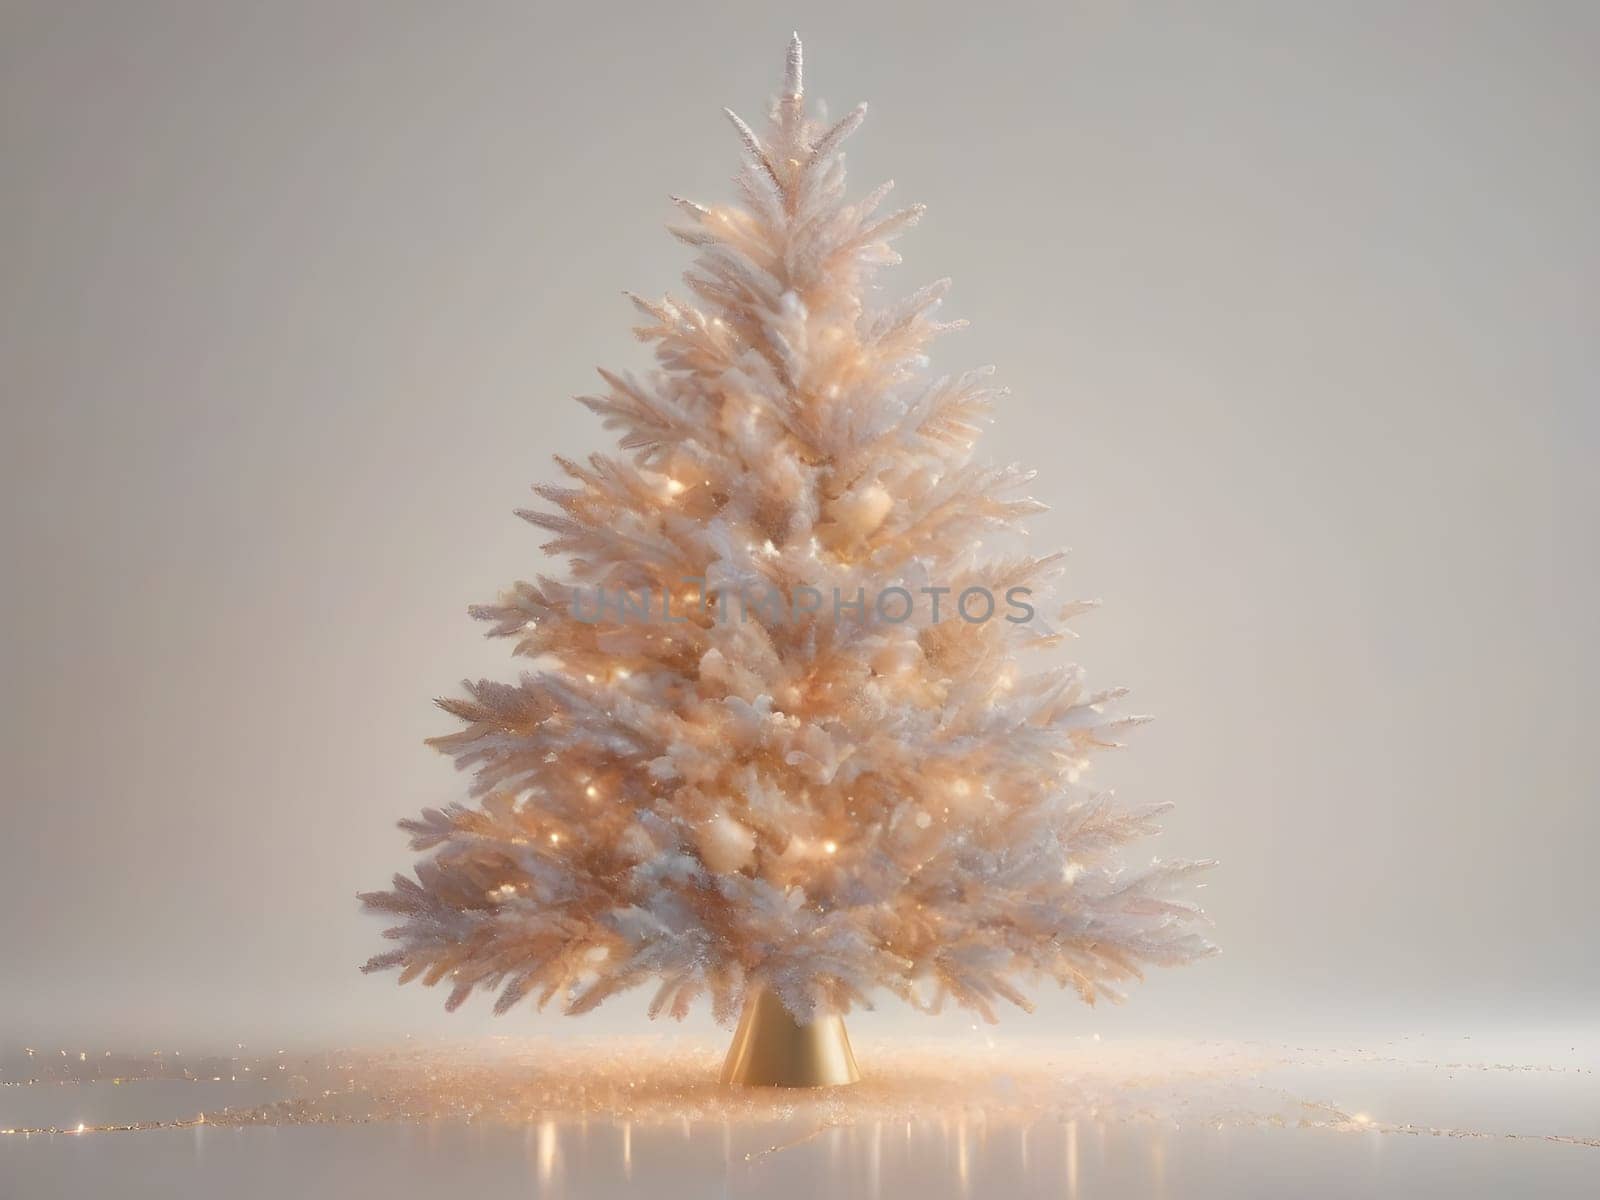 A White Christmas Tree with Lights on it in Peach Fuzz Colors by LanaLeta